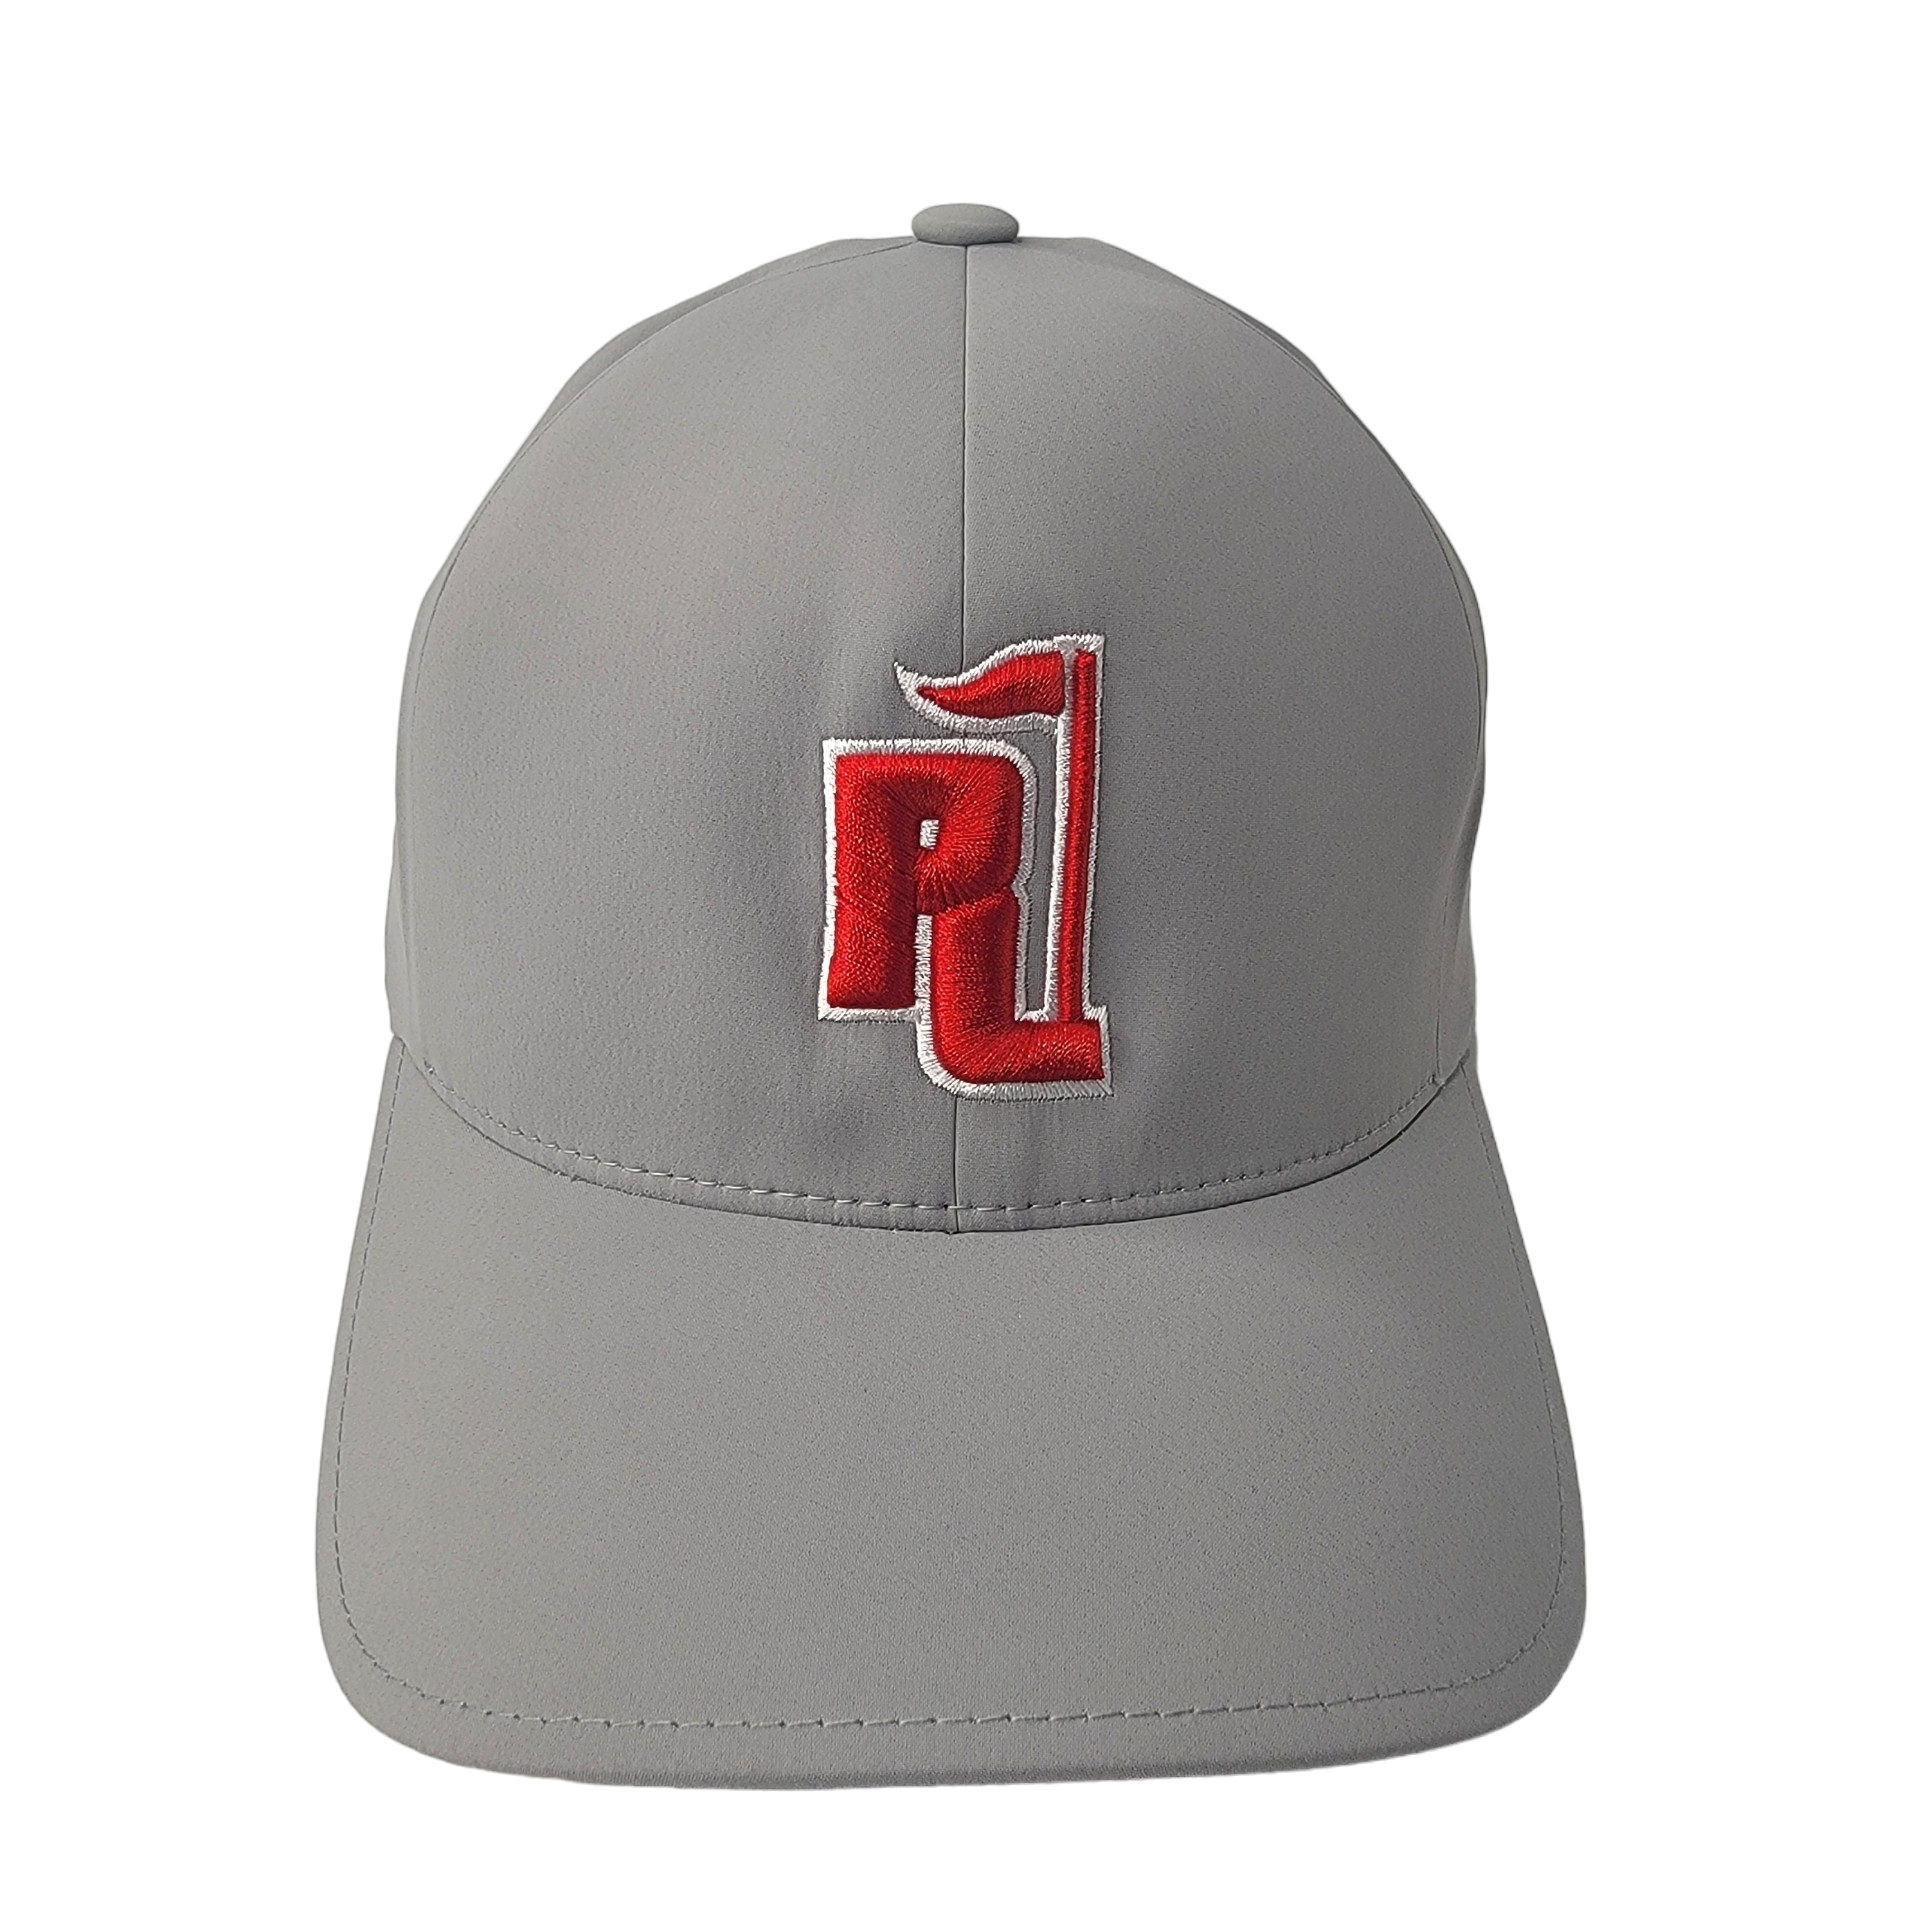 Raza Golf Gray Fitted Hat with Red and White Logo